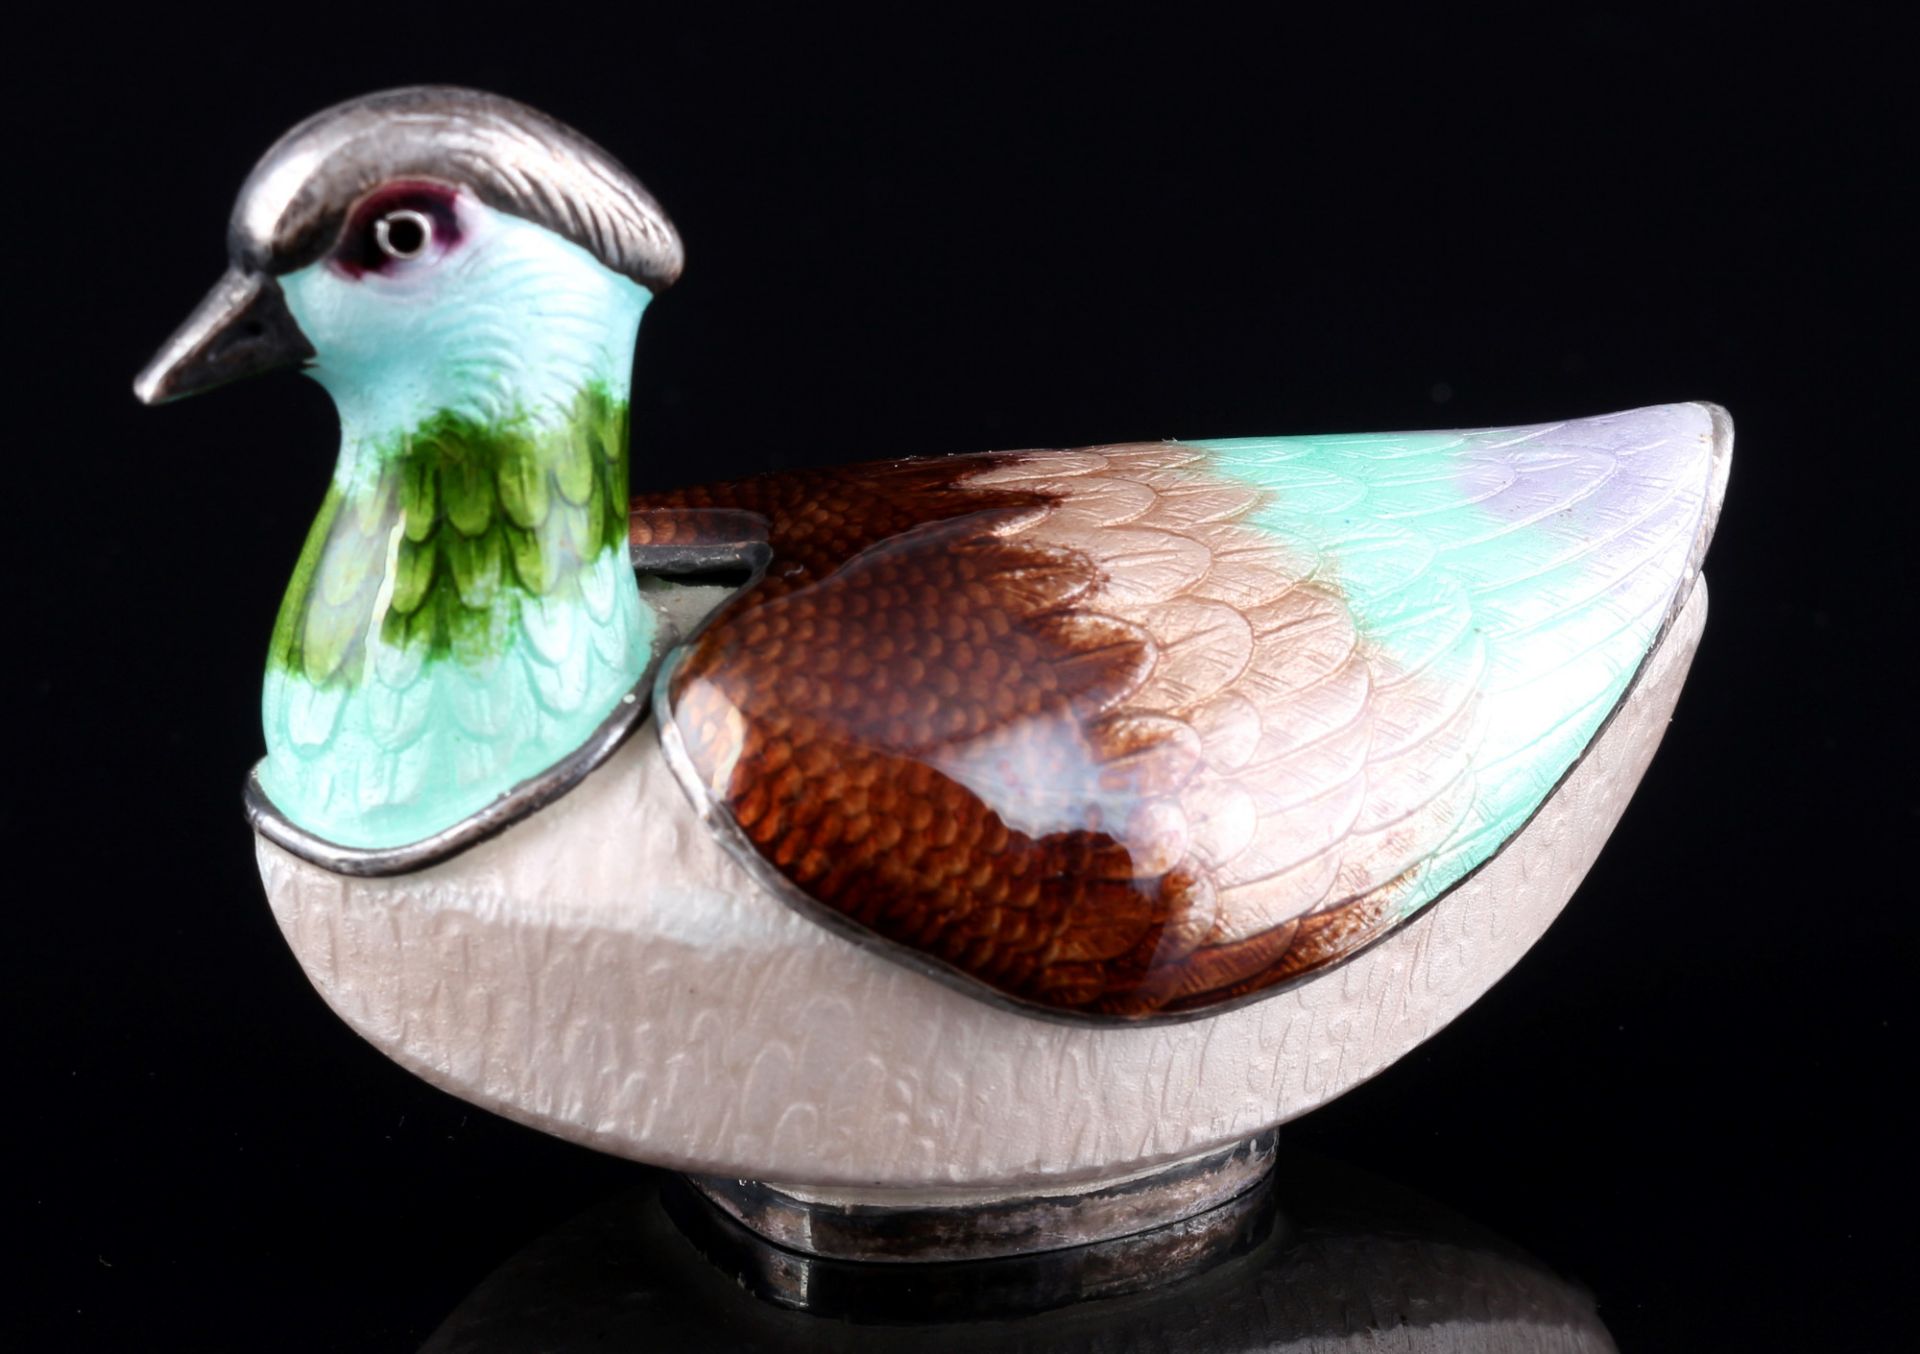 China 98 silver duck with Guilloche enamel, China 98 Silber Ente mit Guilloche Emaille,